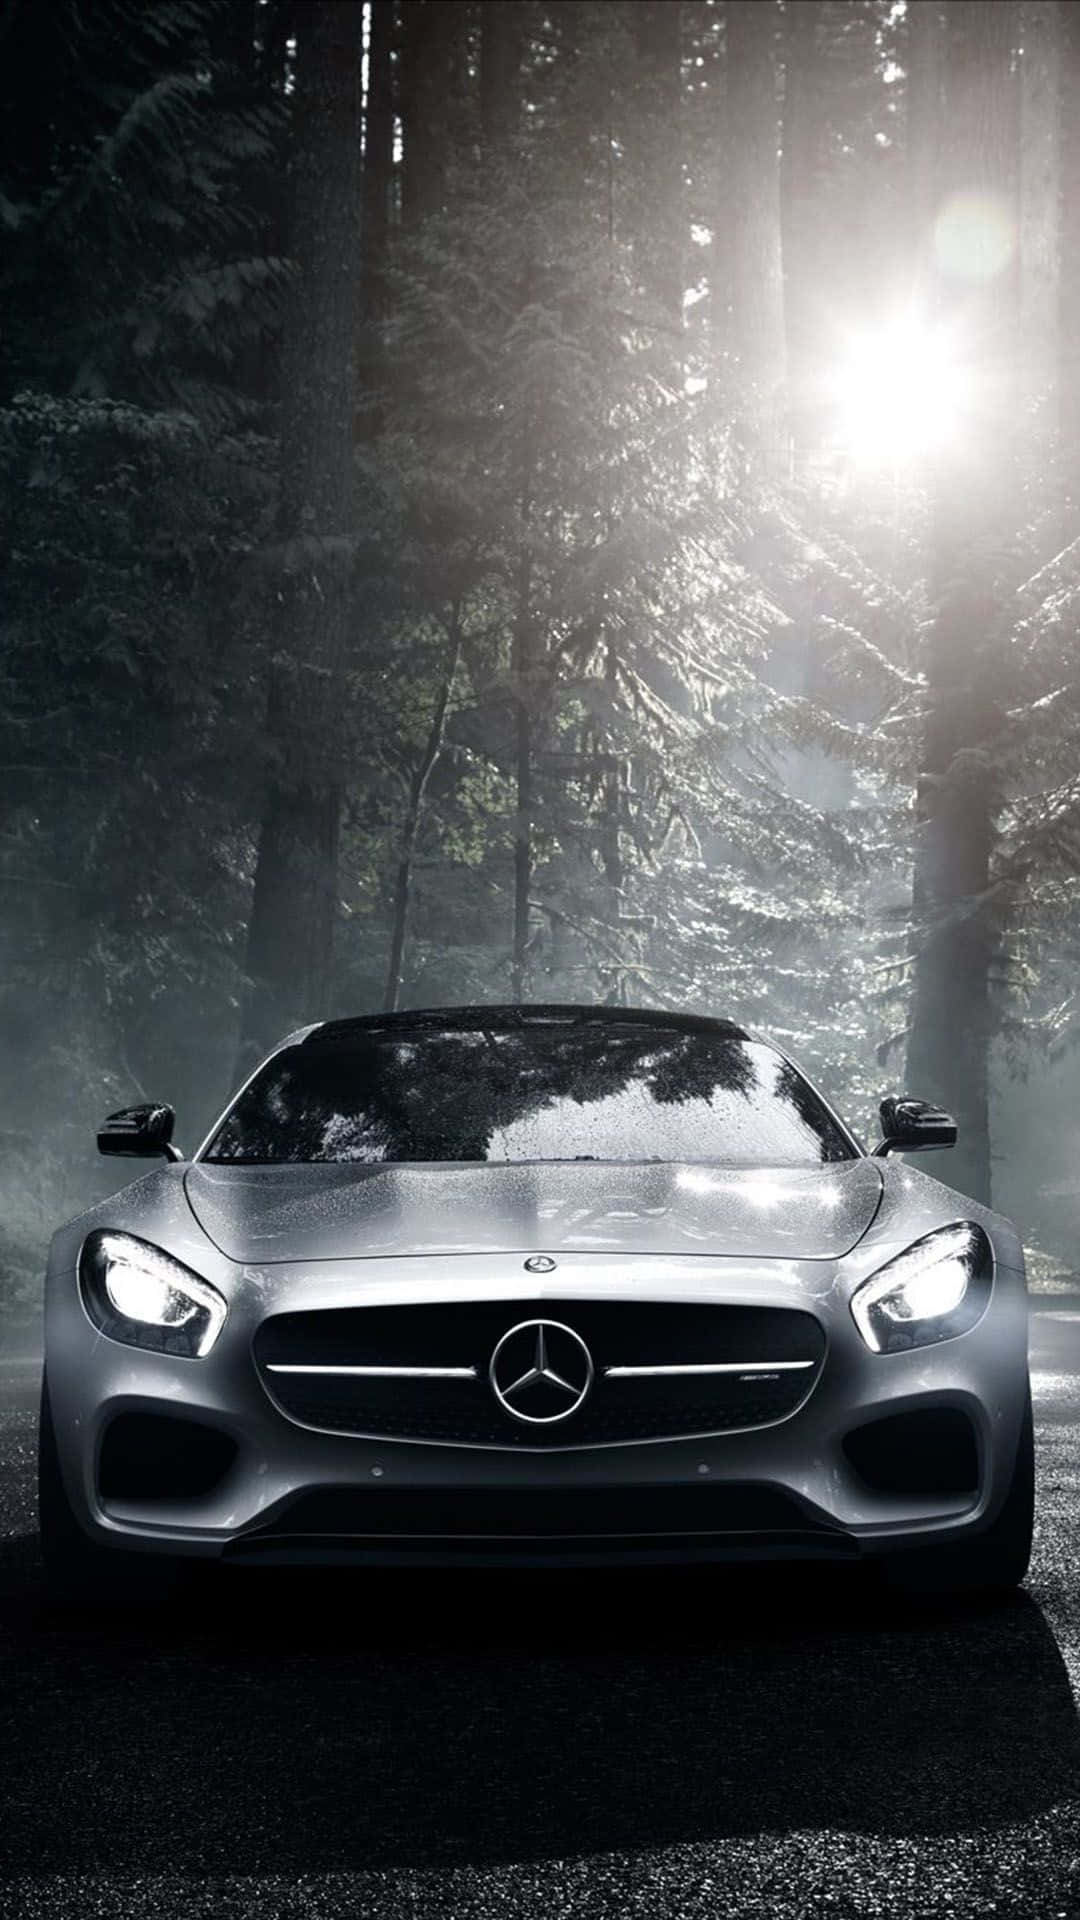 Mercedes Classic Icy Silver Iphone Wallpaper